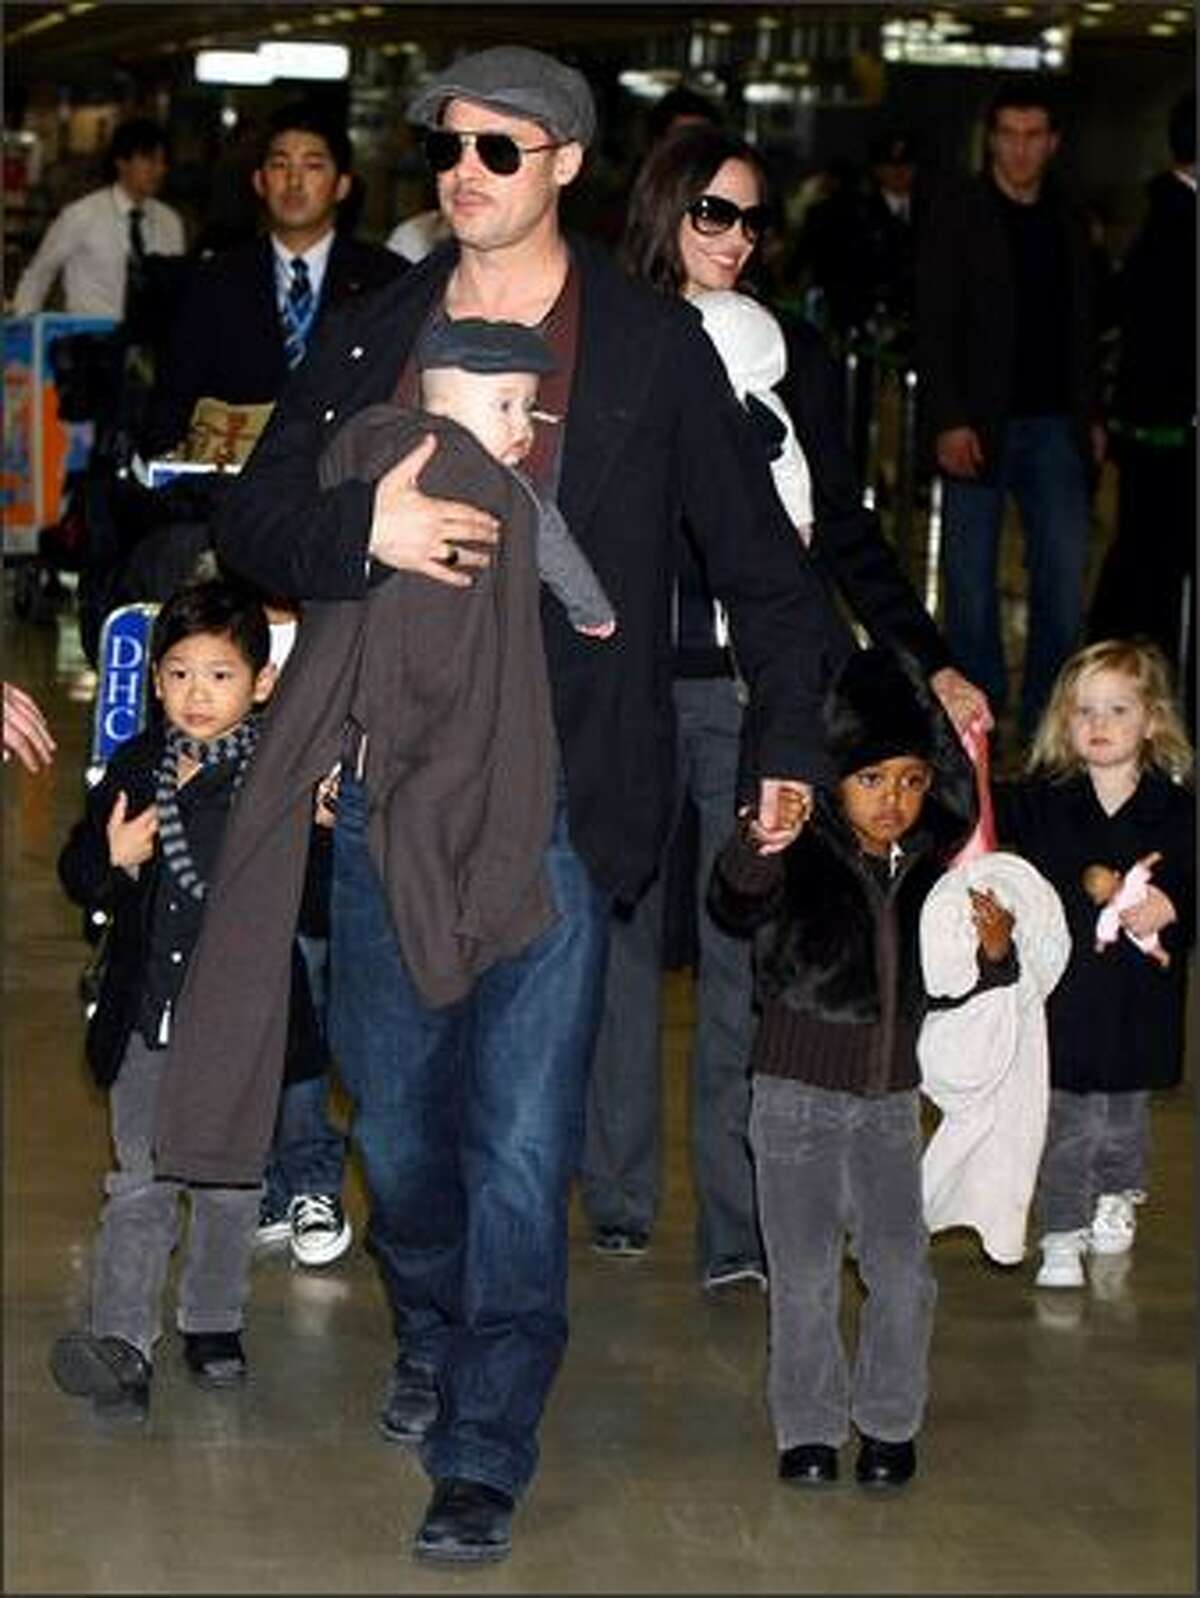 Actor Brad Pitt and Angelina Jolie arrive at Narita International Airport with their children (L to R) Pax Thien, Knox, Zahara and Shiloh in Narita, Chiba, Japan. Brad is visiting Japan to promote his film "The Curious Case Of Benjamin Button".